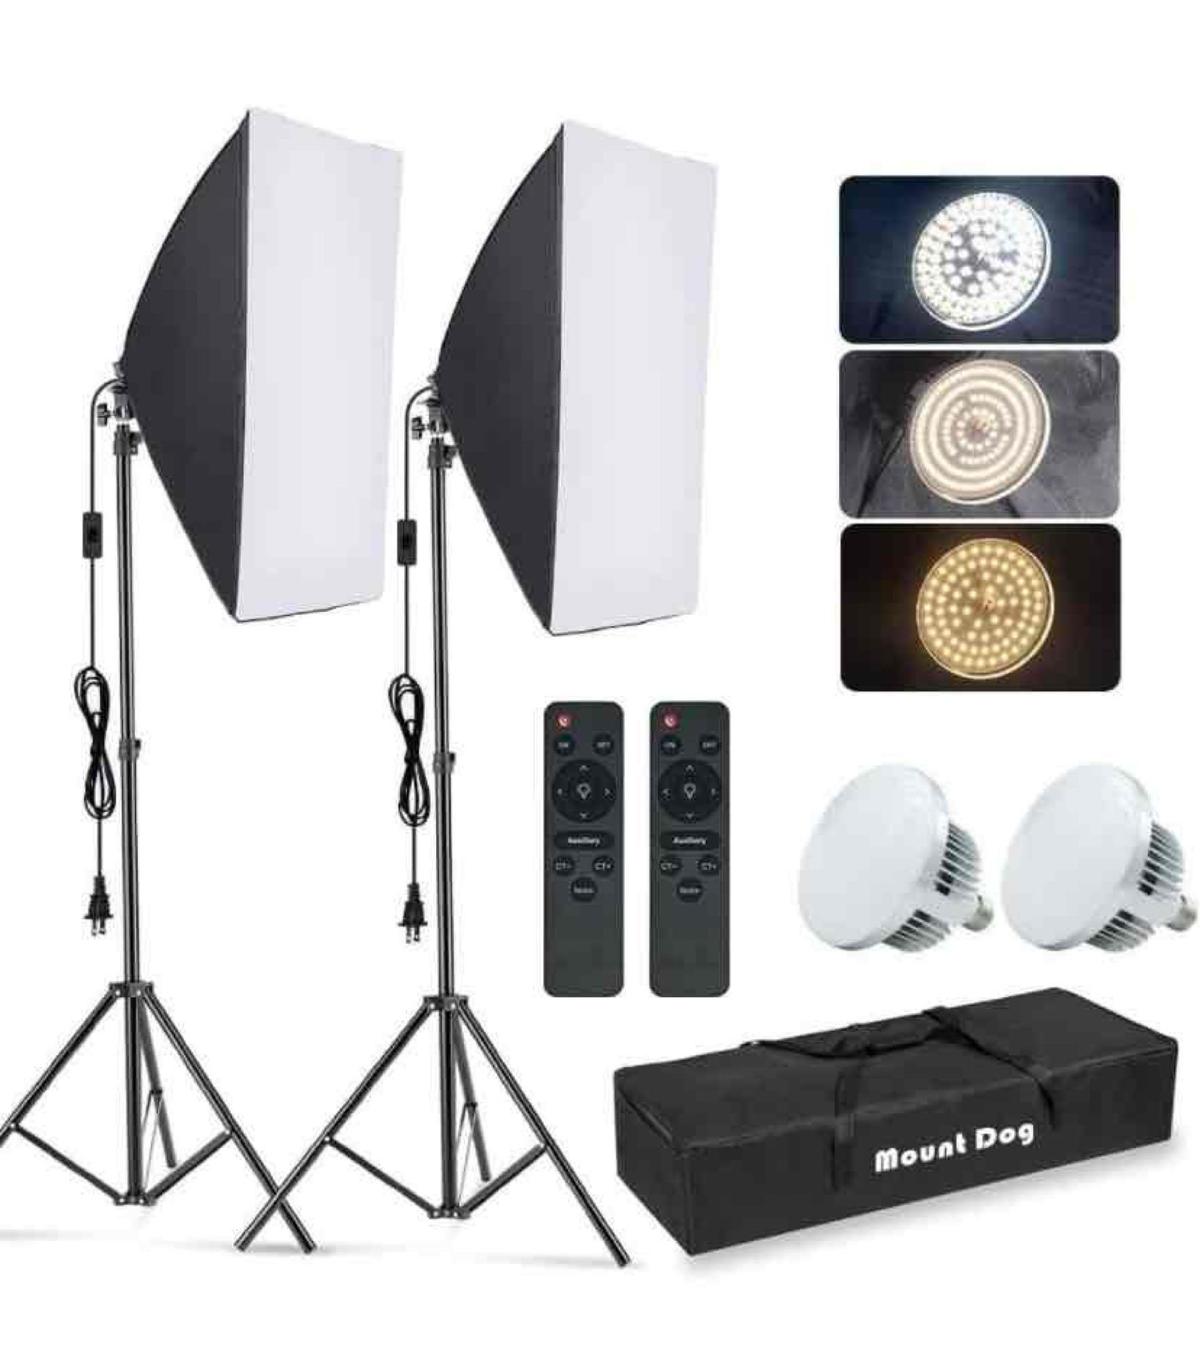 MOUNTDOG Softbox Lighting Kit, 2x19.7"x27.5" Photography Continuous Lighting System with 2pcs 85W